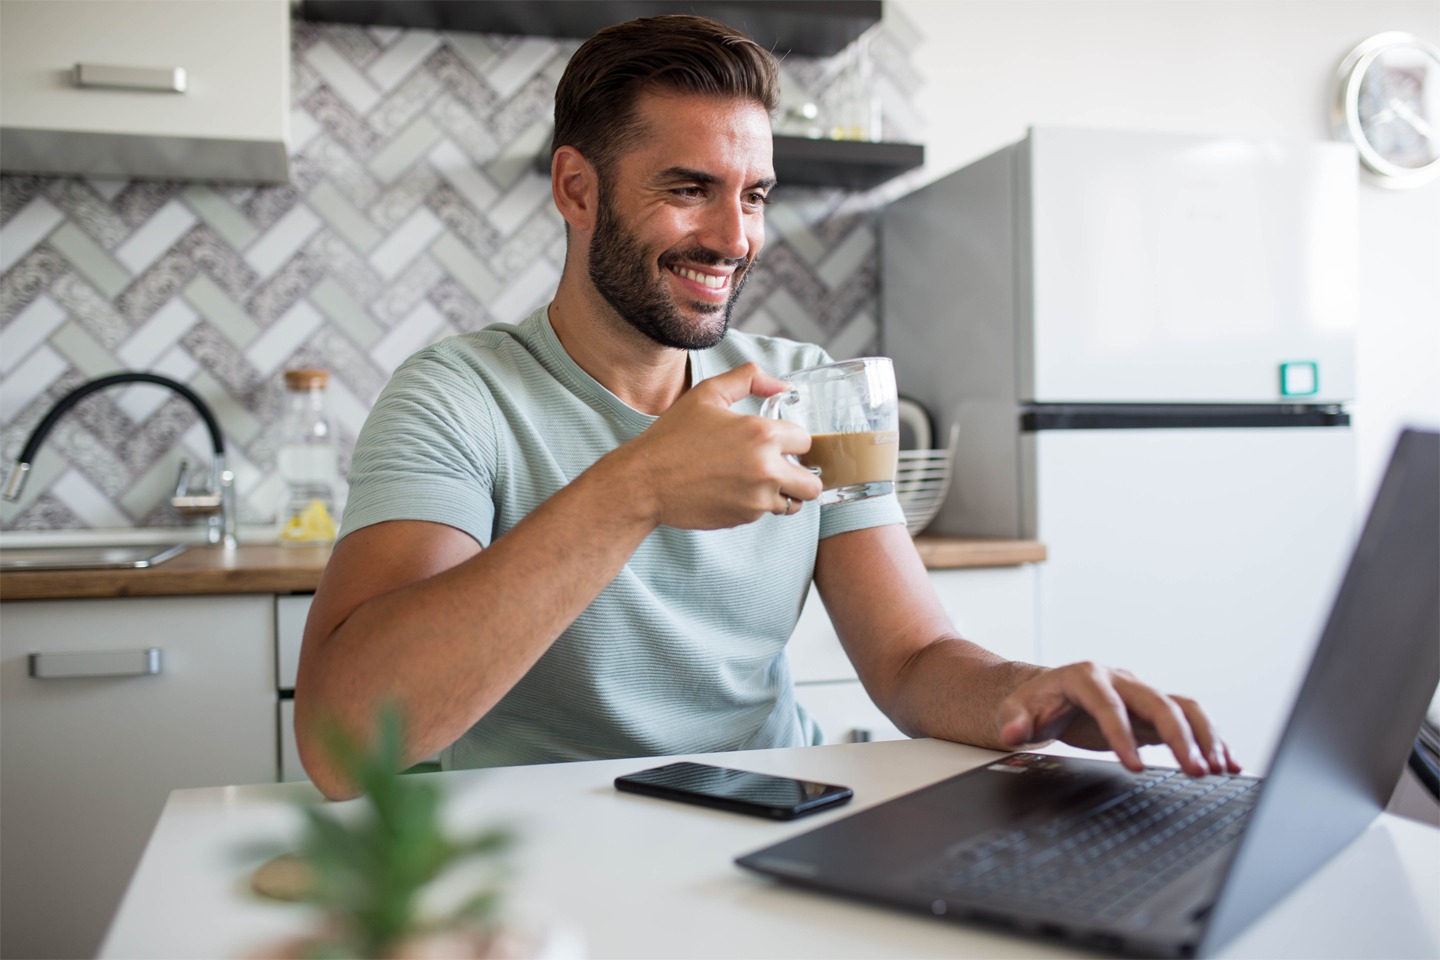 A man working from home, sitting at a desk, looking at his laptop, holds a cup. He is smiling